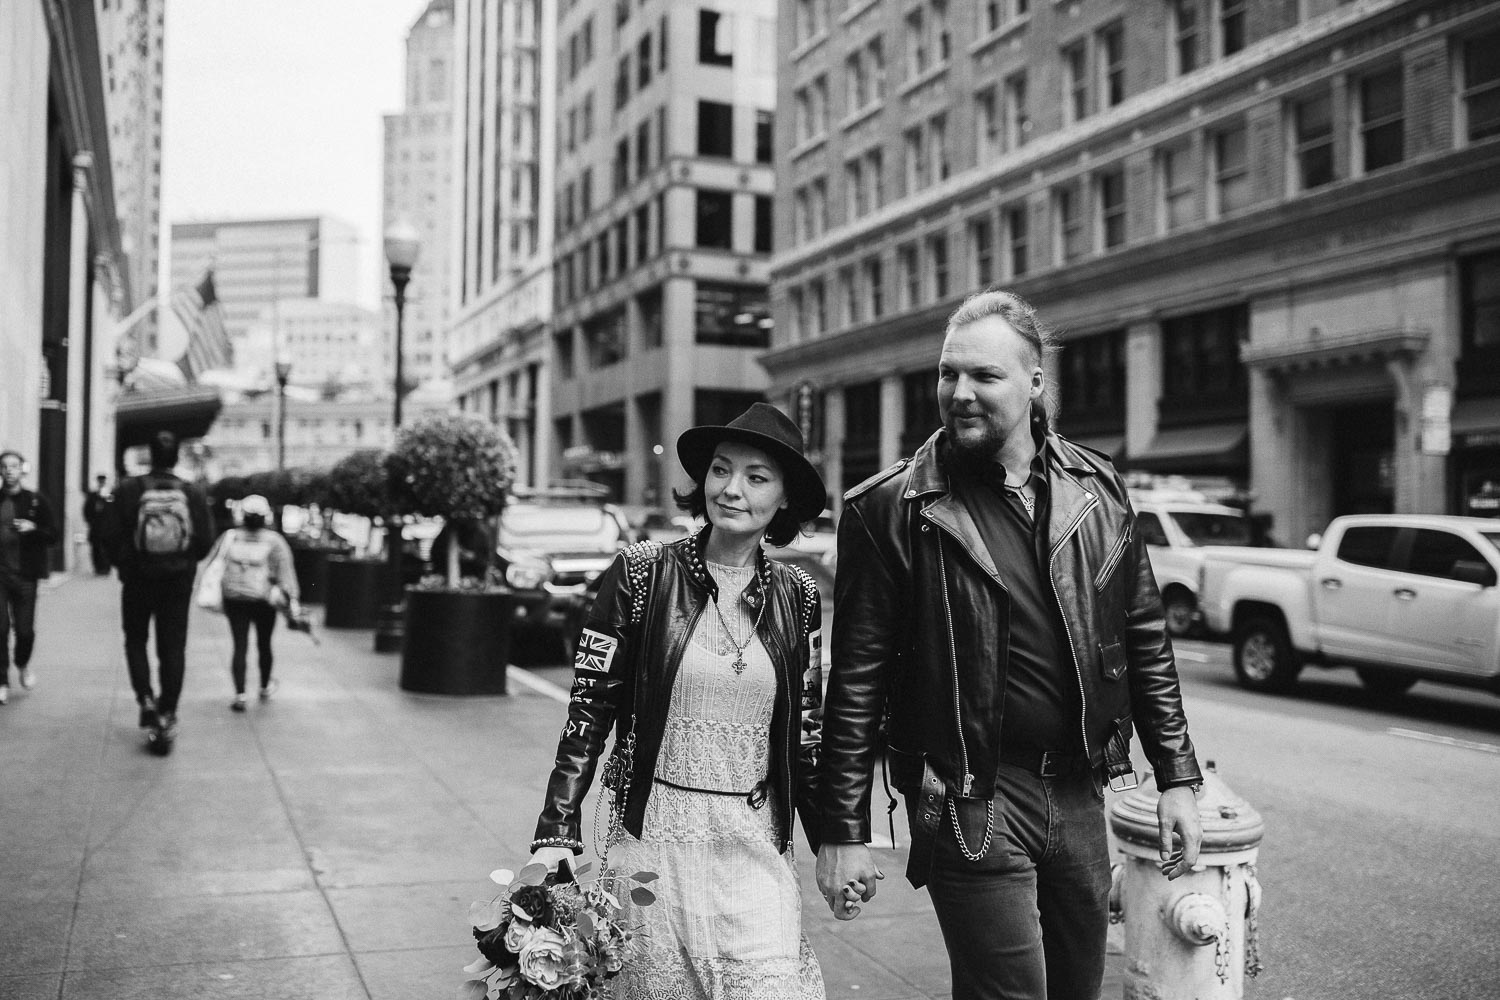 Rock'n'Roll elopement in San Francisco Downtown. Hard Rock bikers wedding. Leather jackets and biker boots